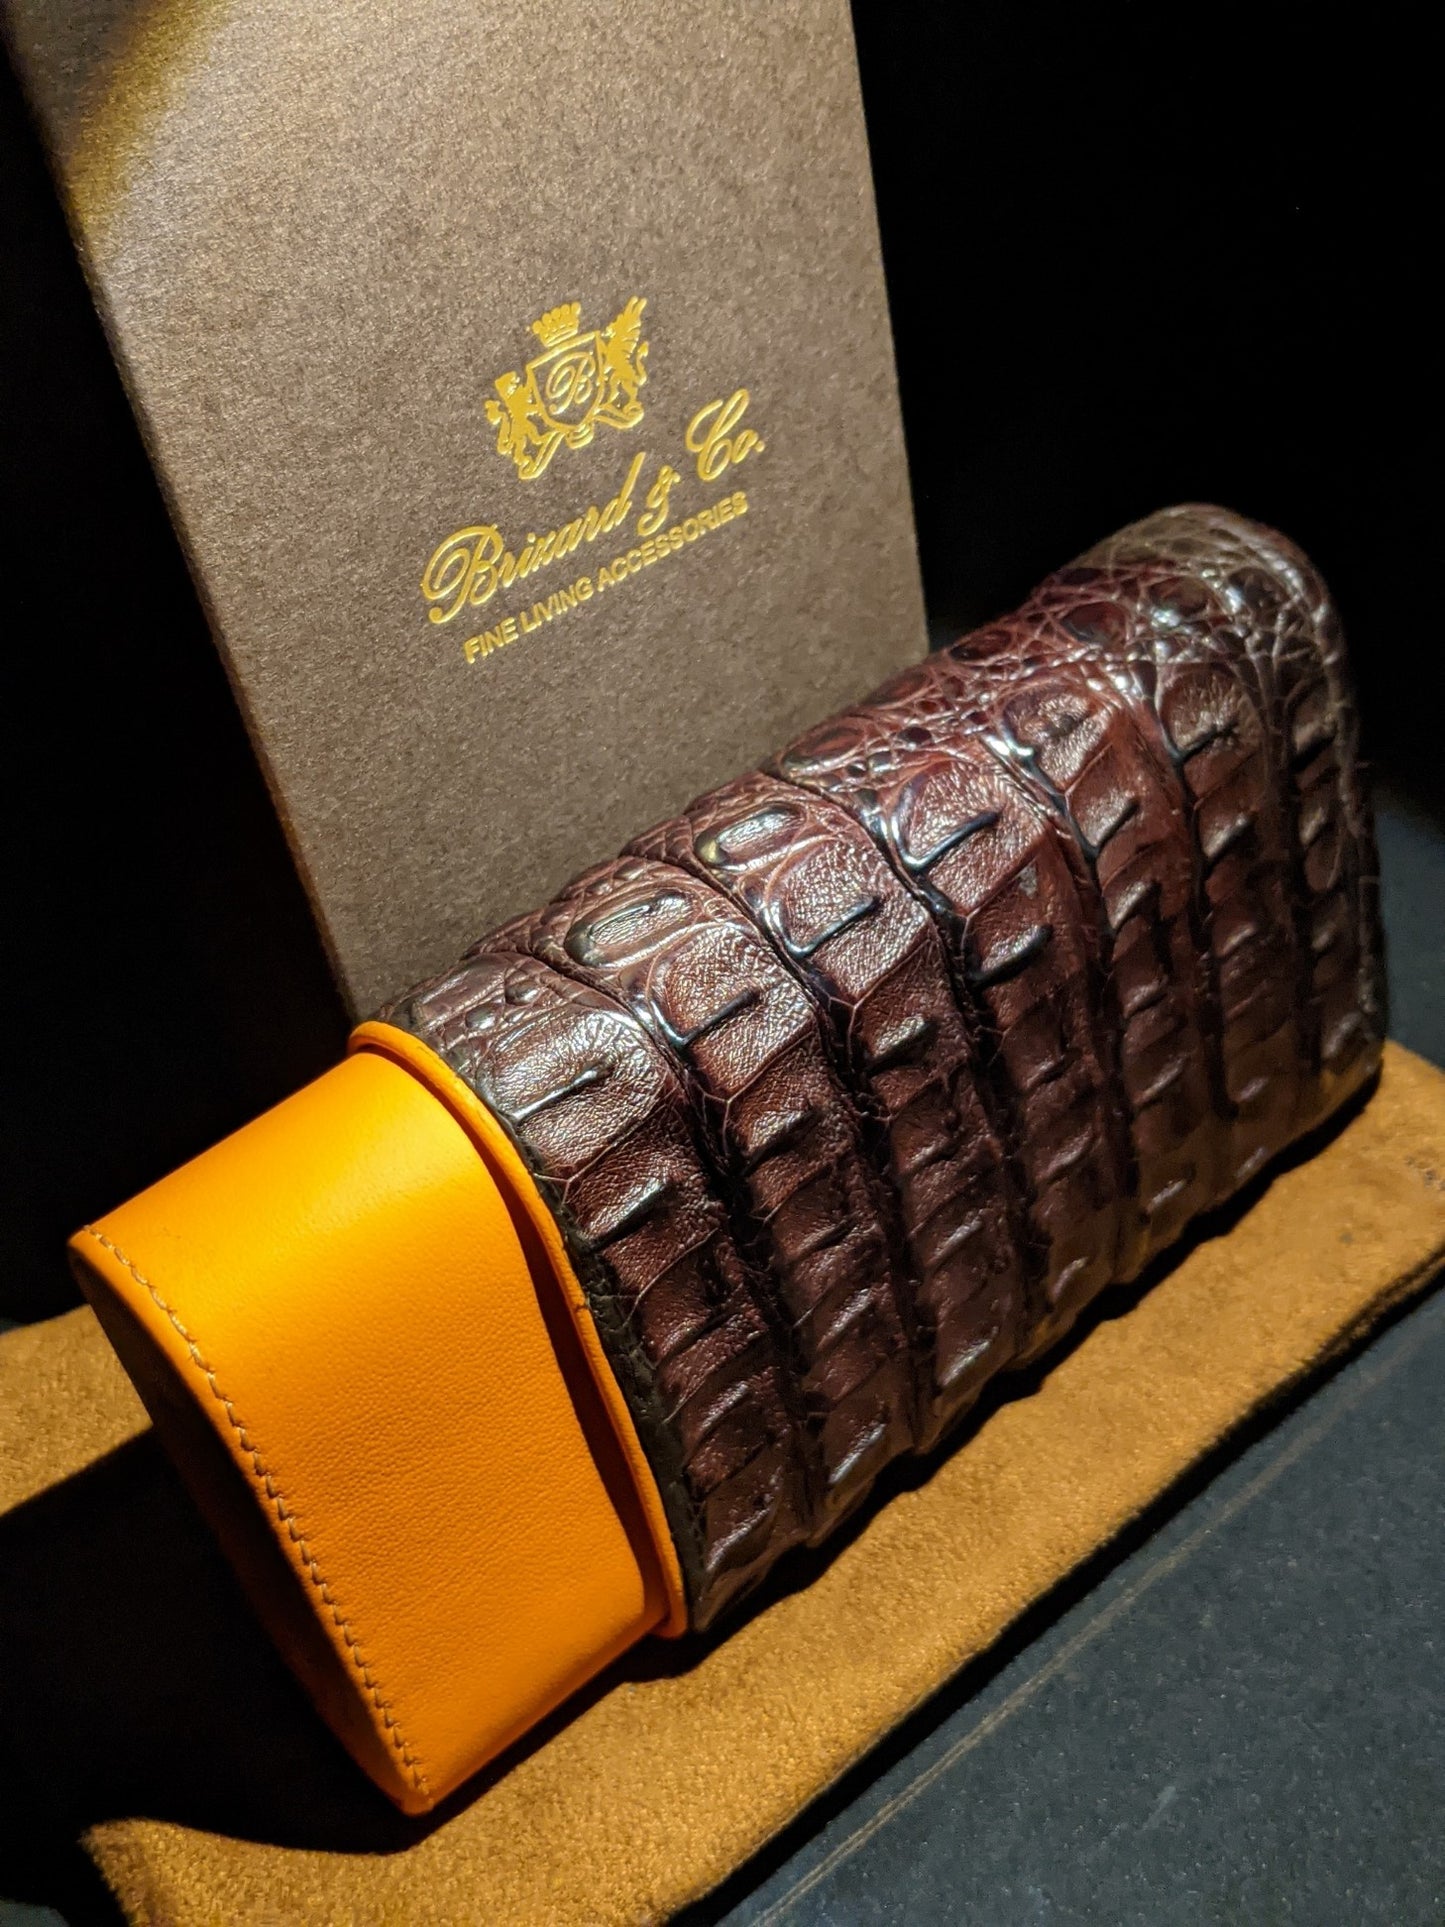 Brizard and Co Brown Showband Caiman case